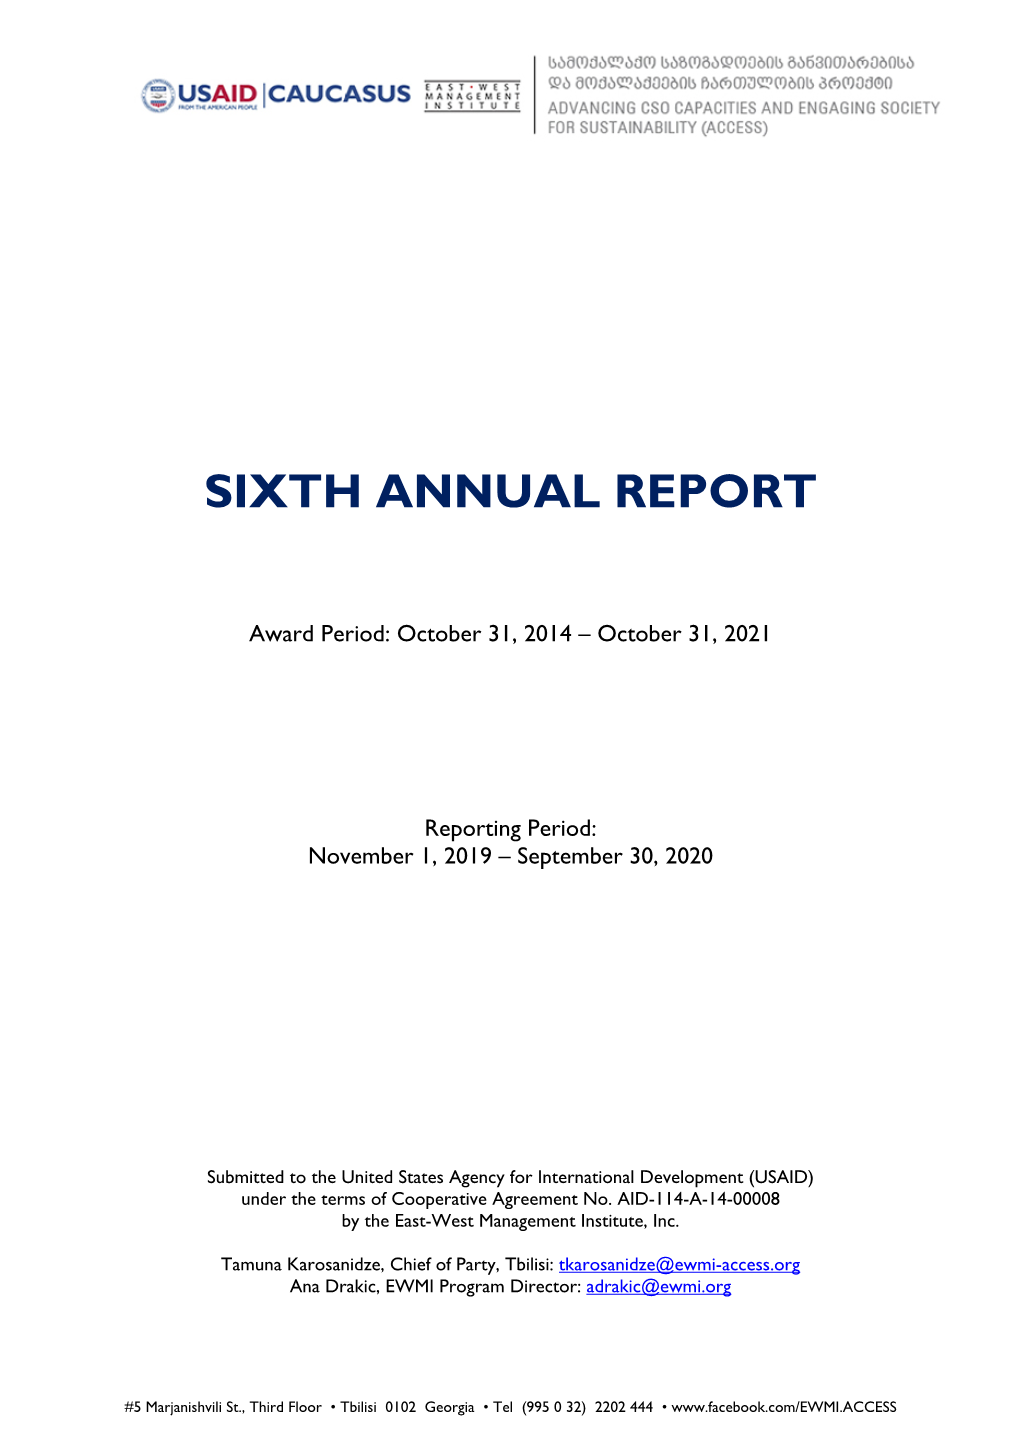 Sixth Annual Report